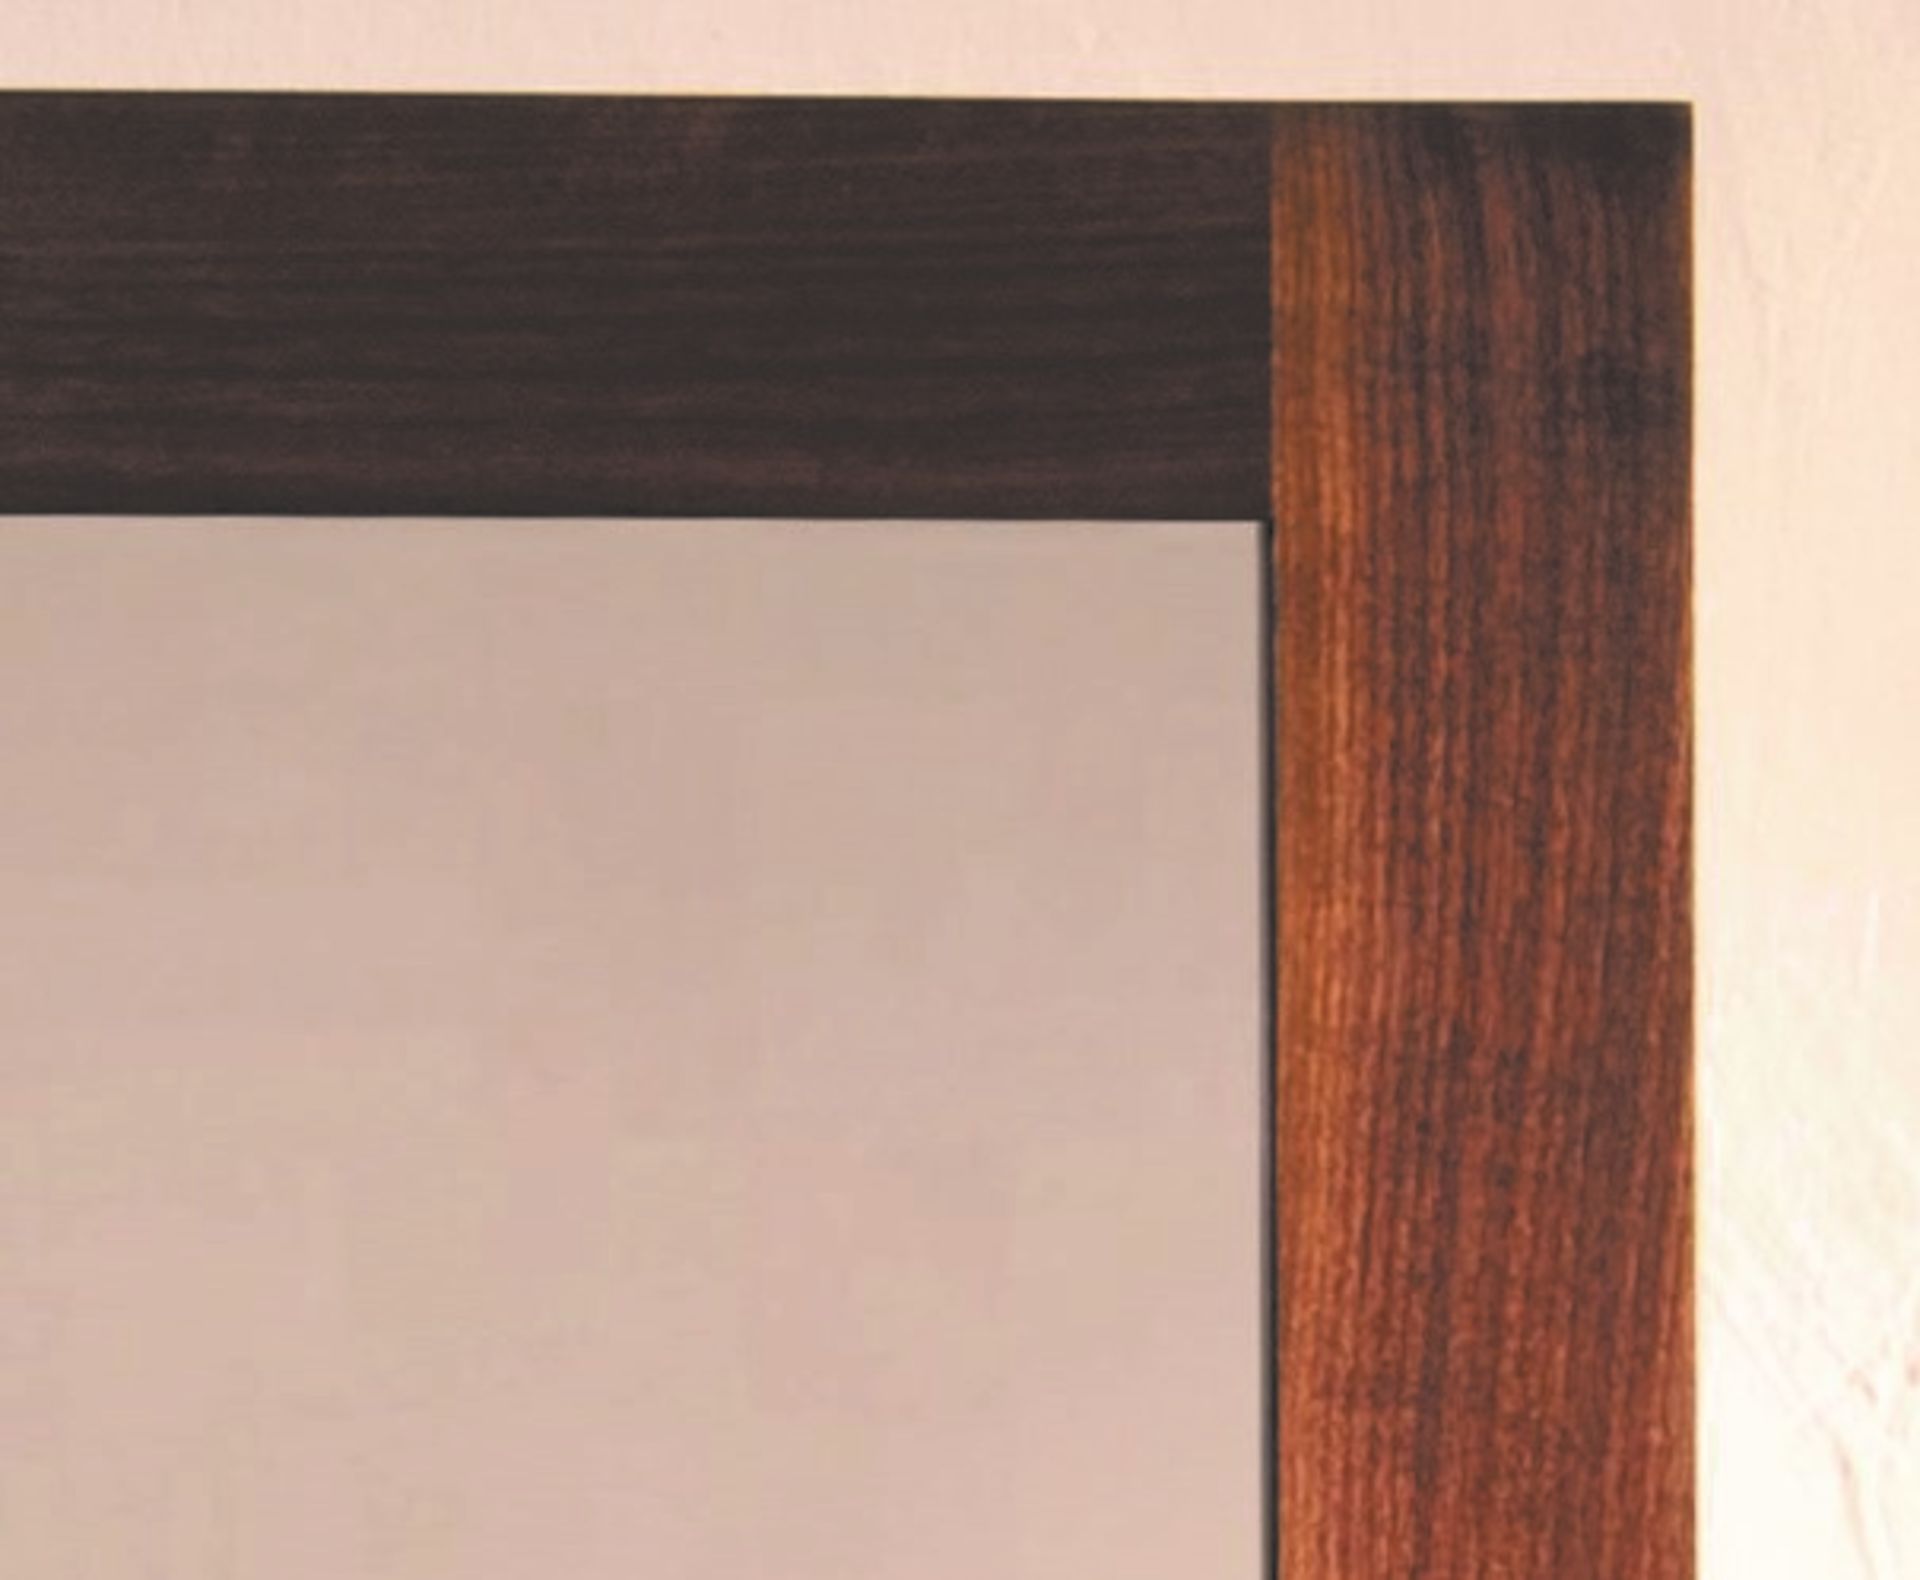 1 x Stonearth Extra Large Bathroom Wall Mirror Frame - American Solid Walnut Frame - Size: W1500mm - Image 4 of 4